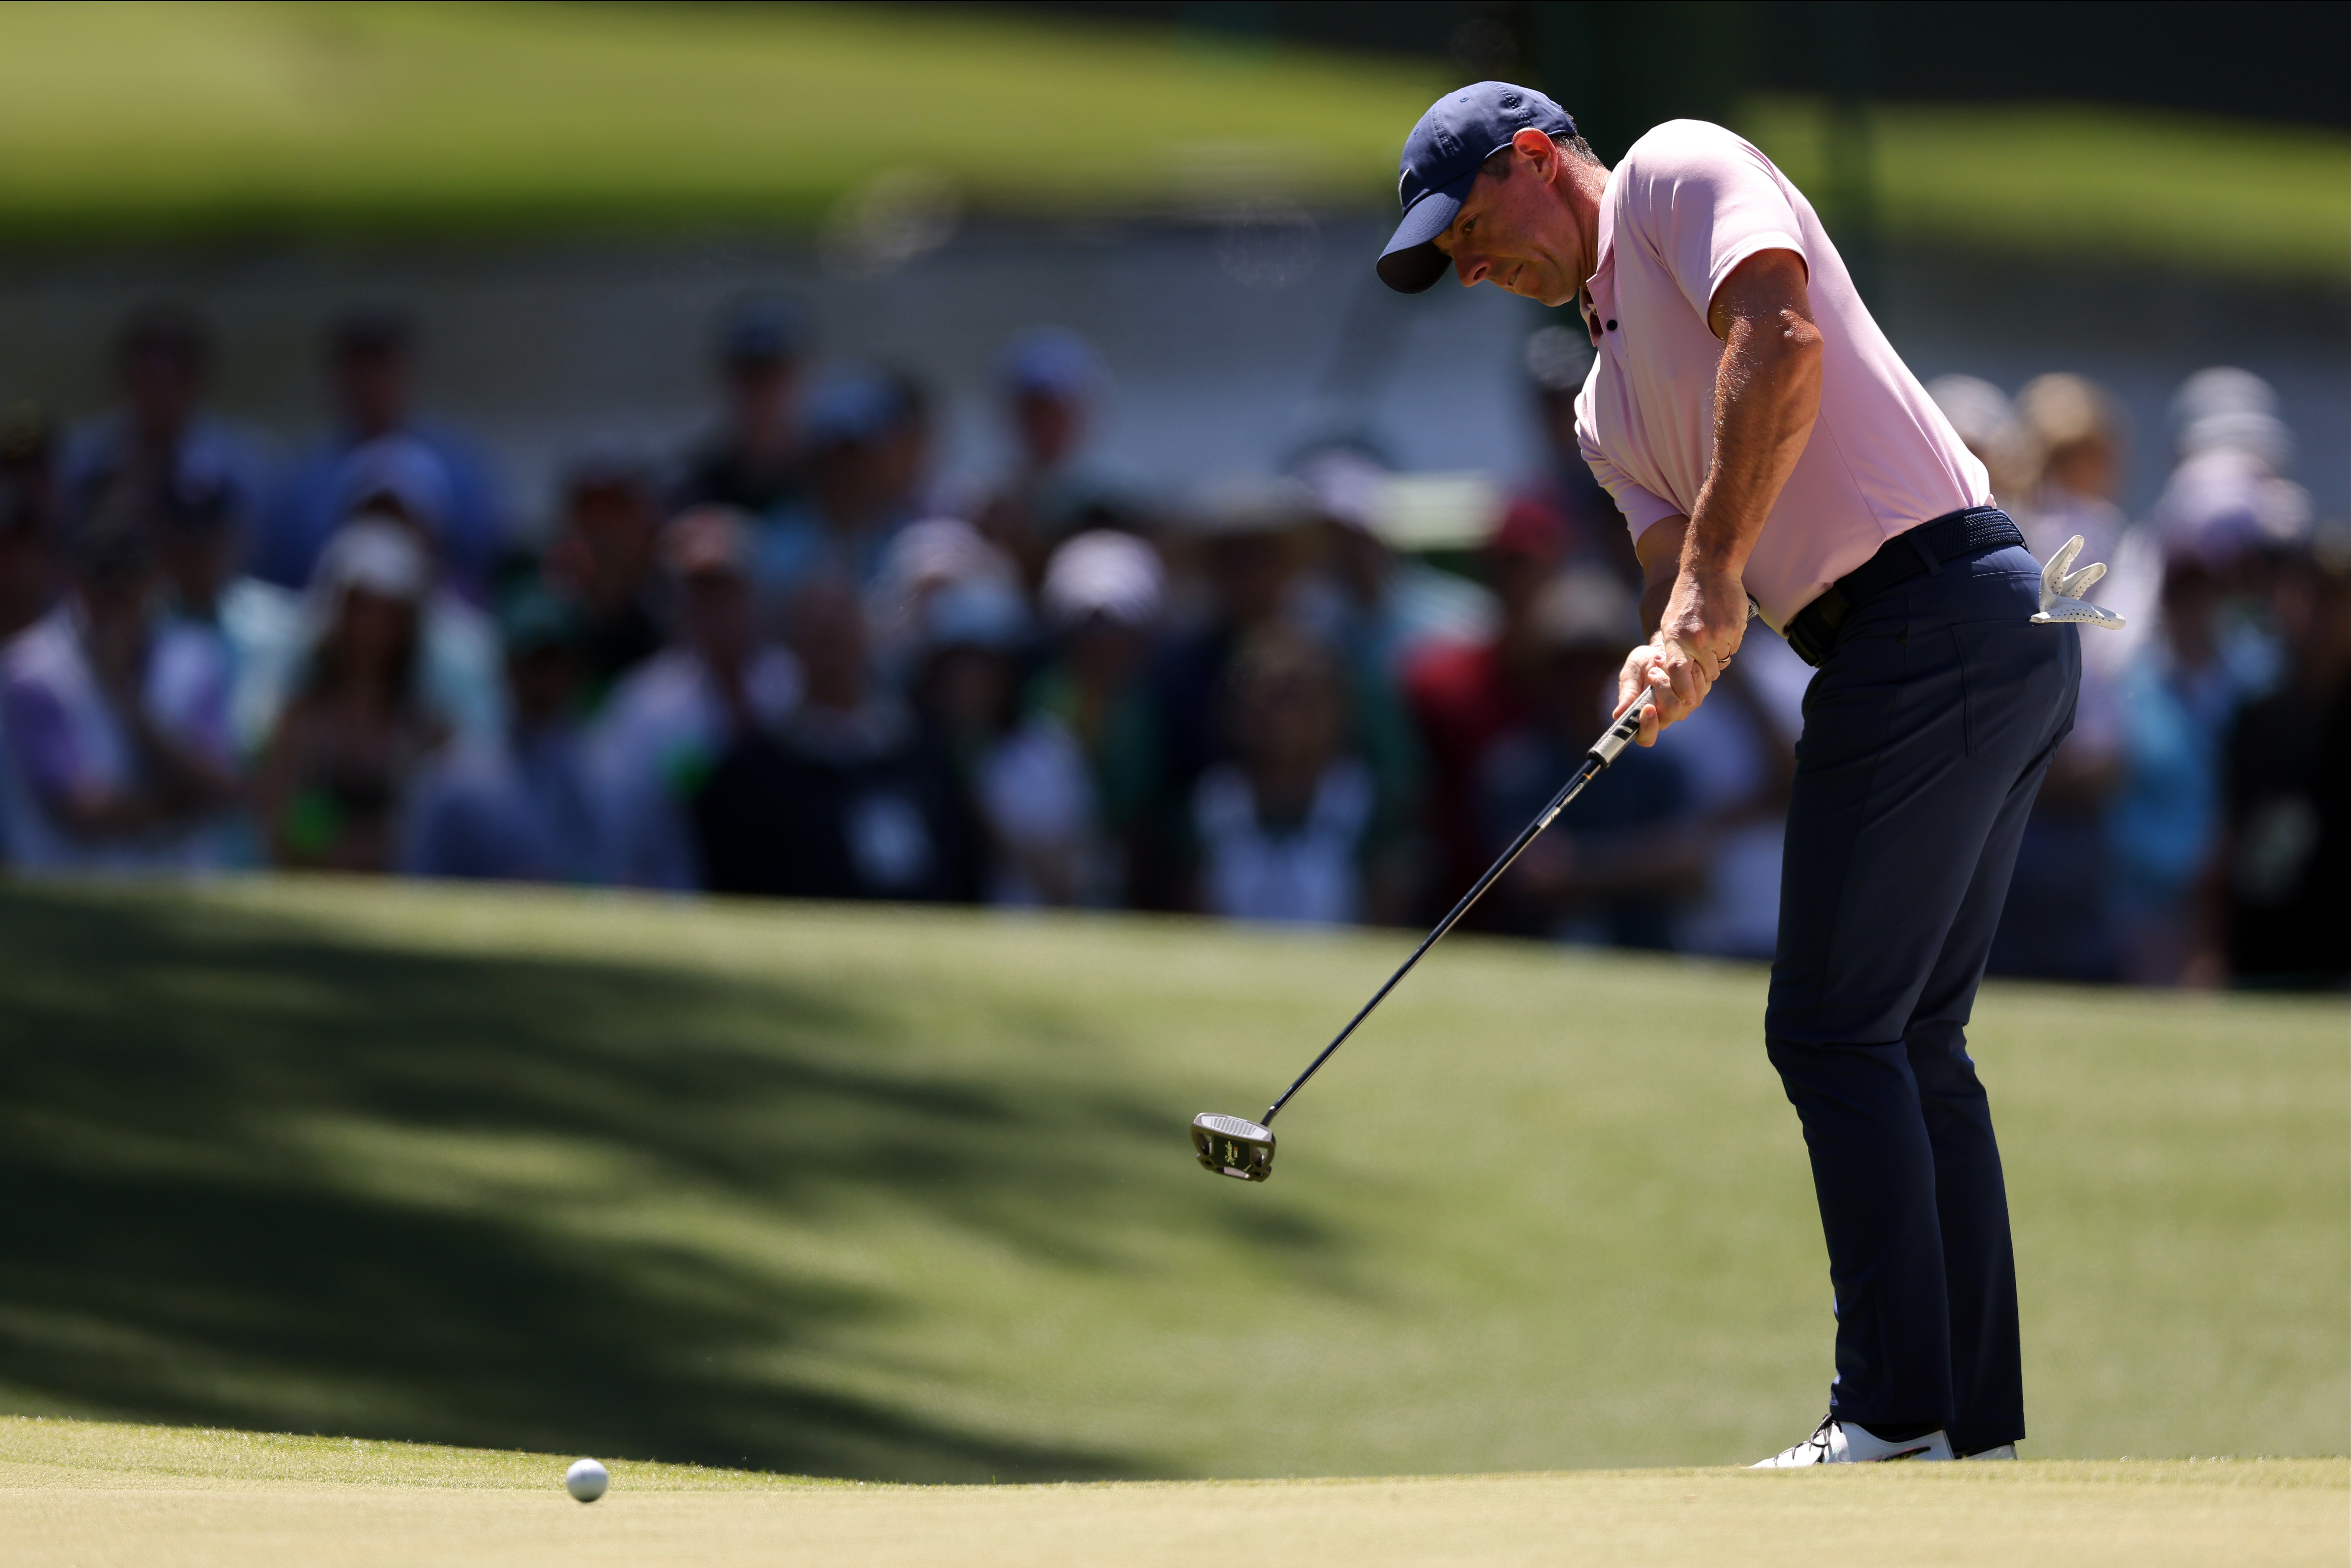 Rory McIlroy missed a few birdie opportunities during his third round